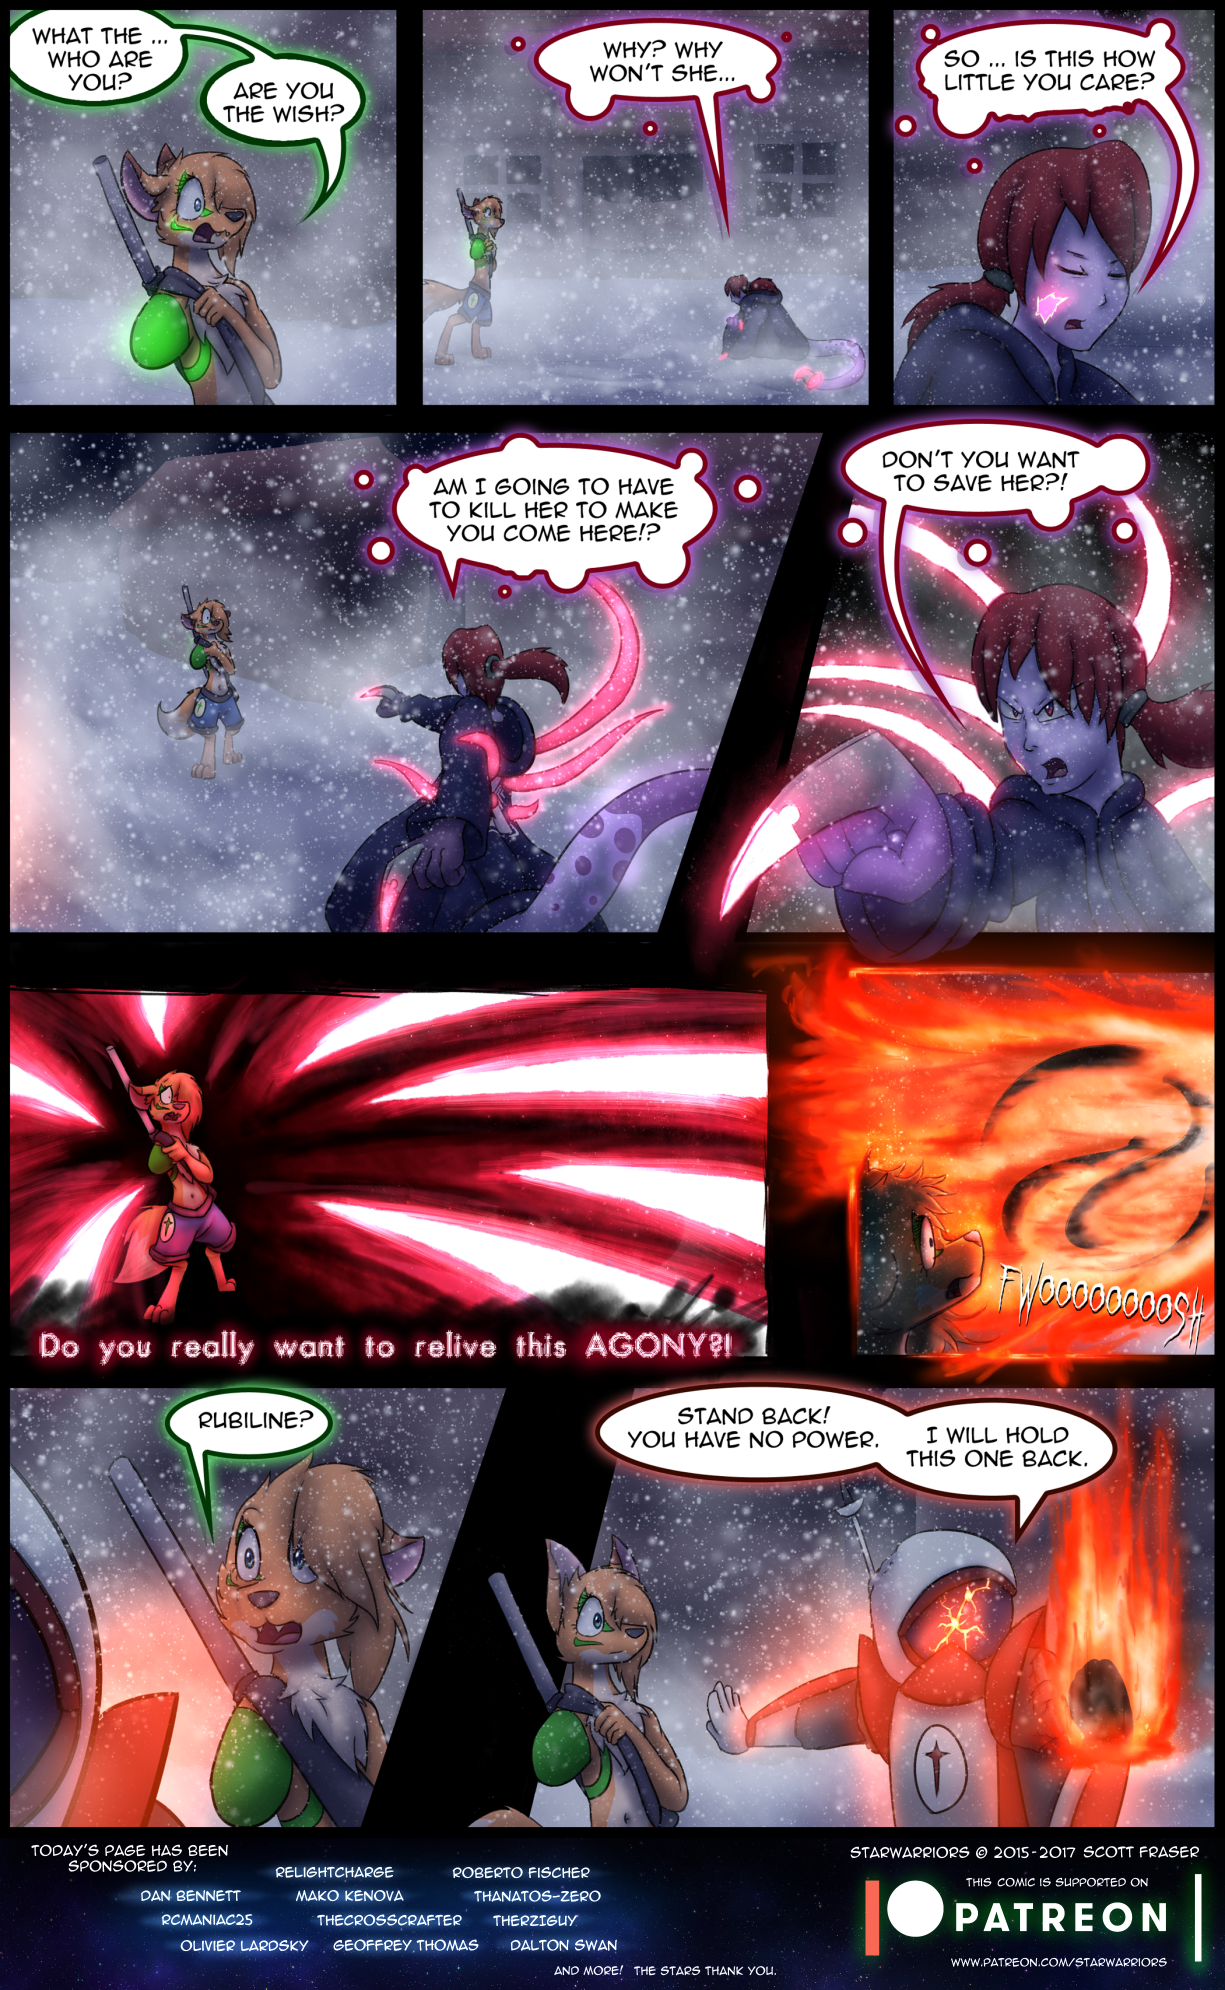 Ch3 Page 1 – Mysterious Person